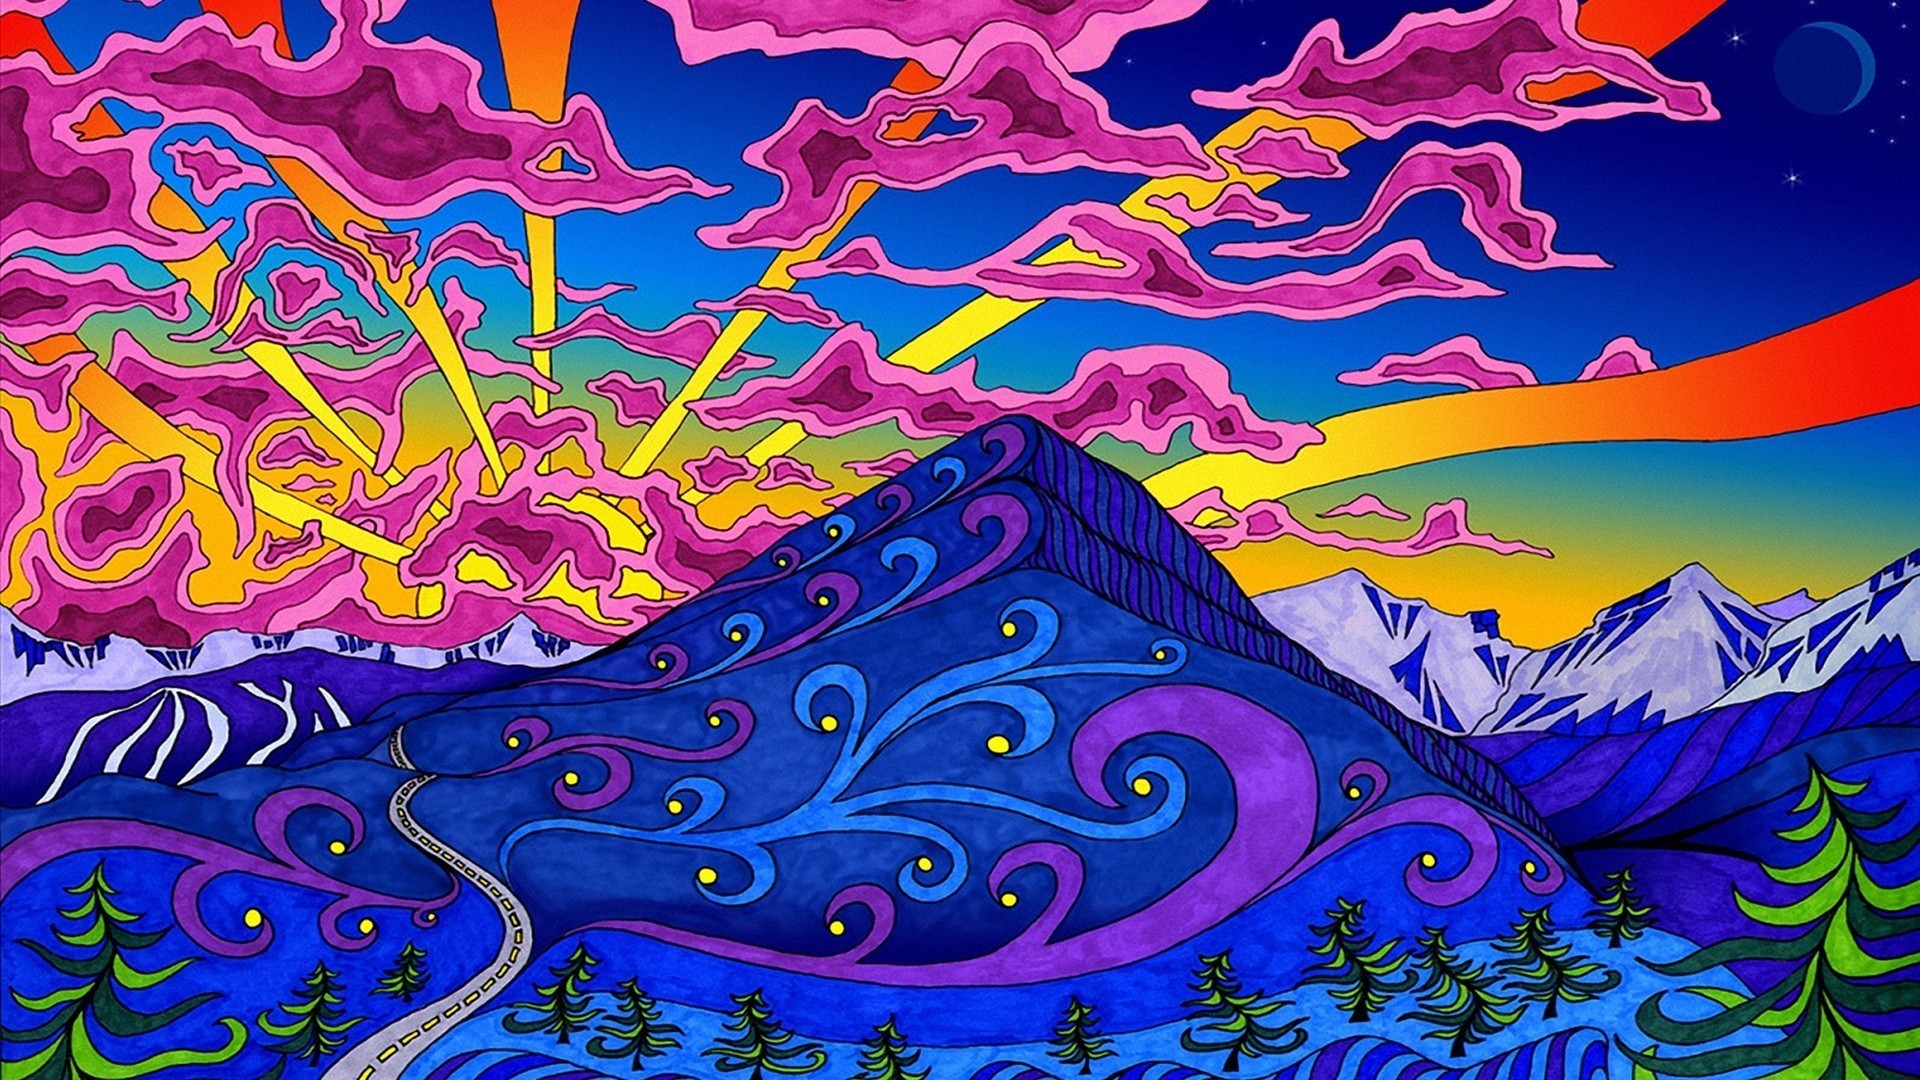 Trippy Wallpapers for Your PC and Desktop Devices